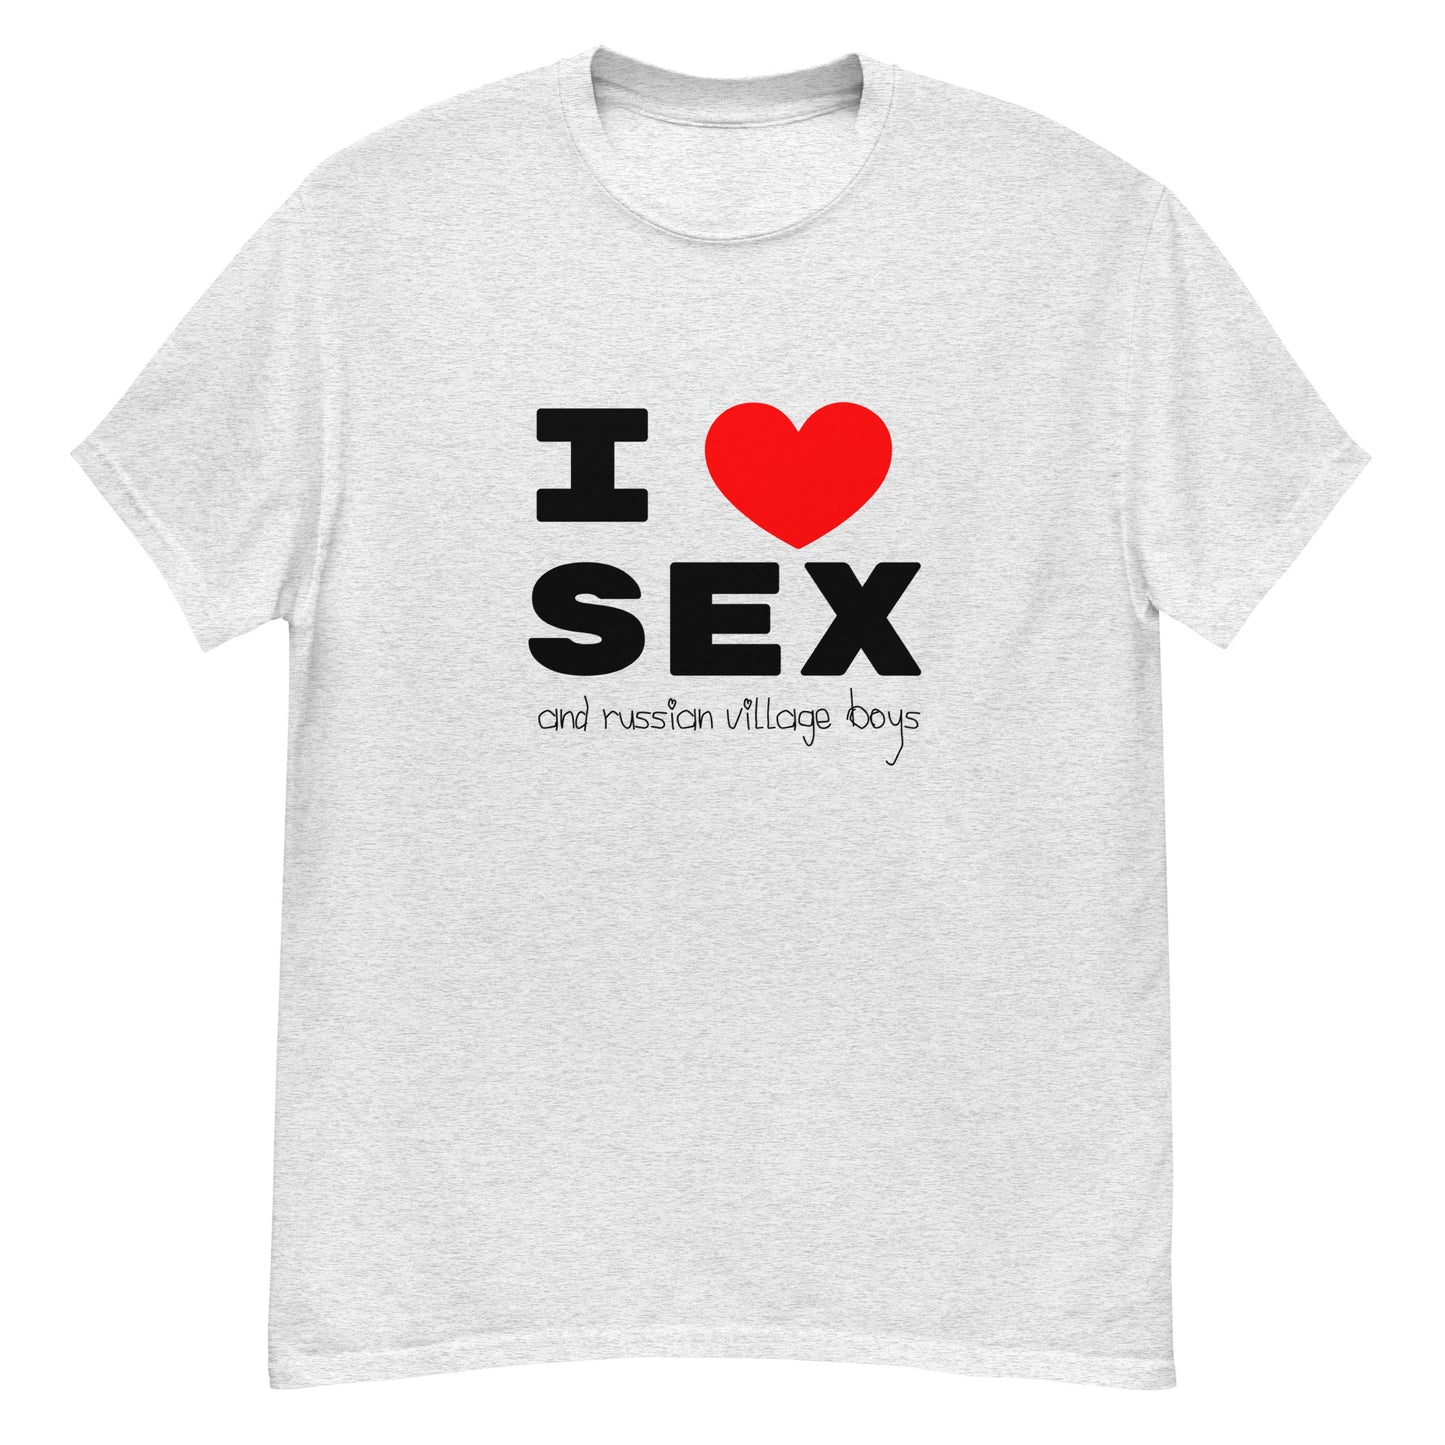 I love sex and russian village boys T-shirt